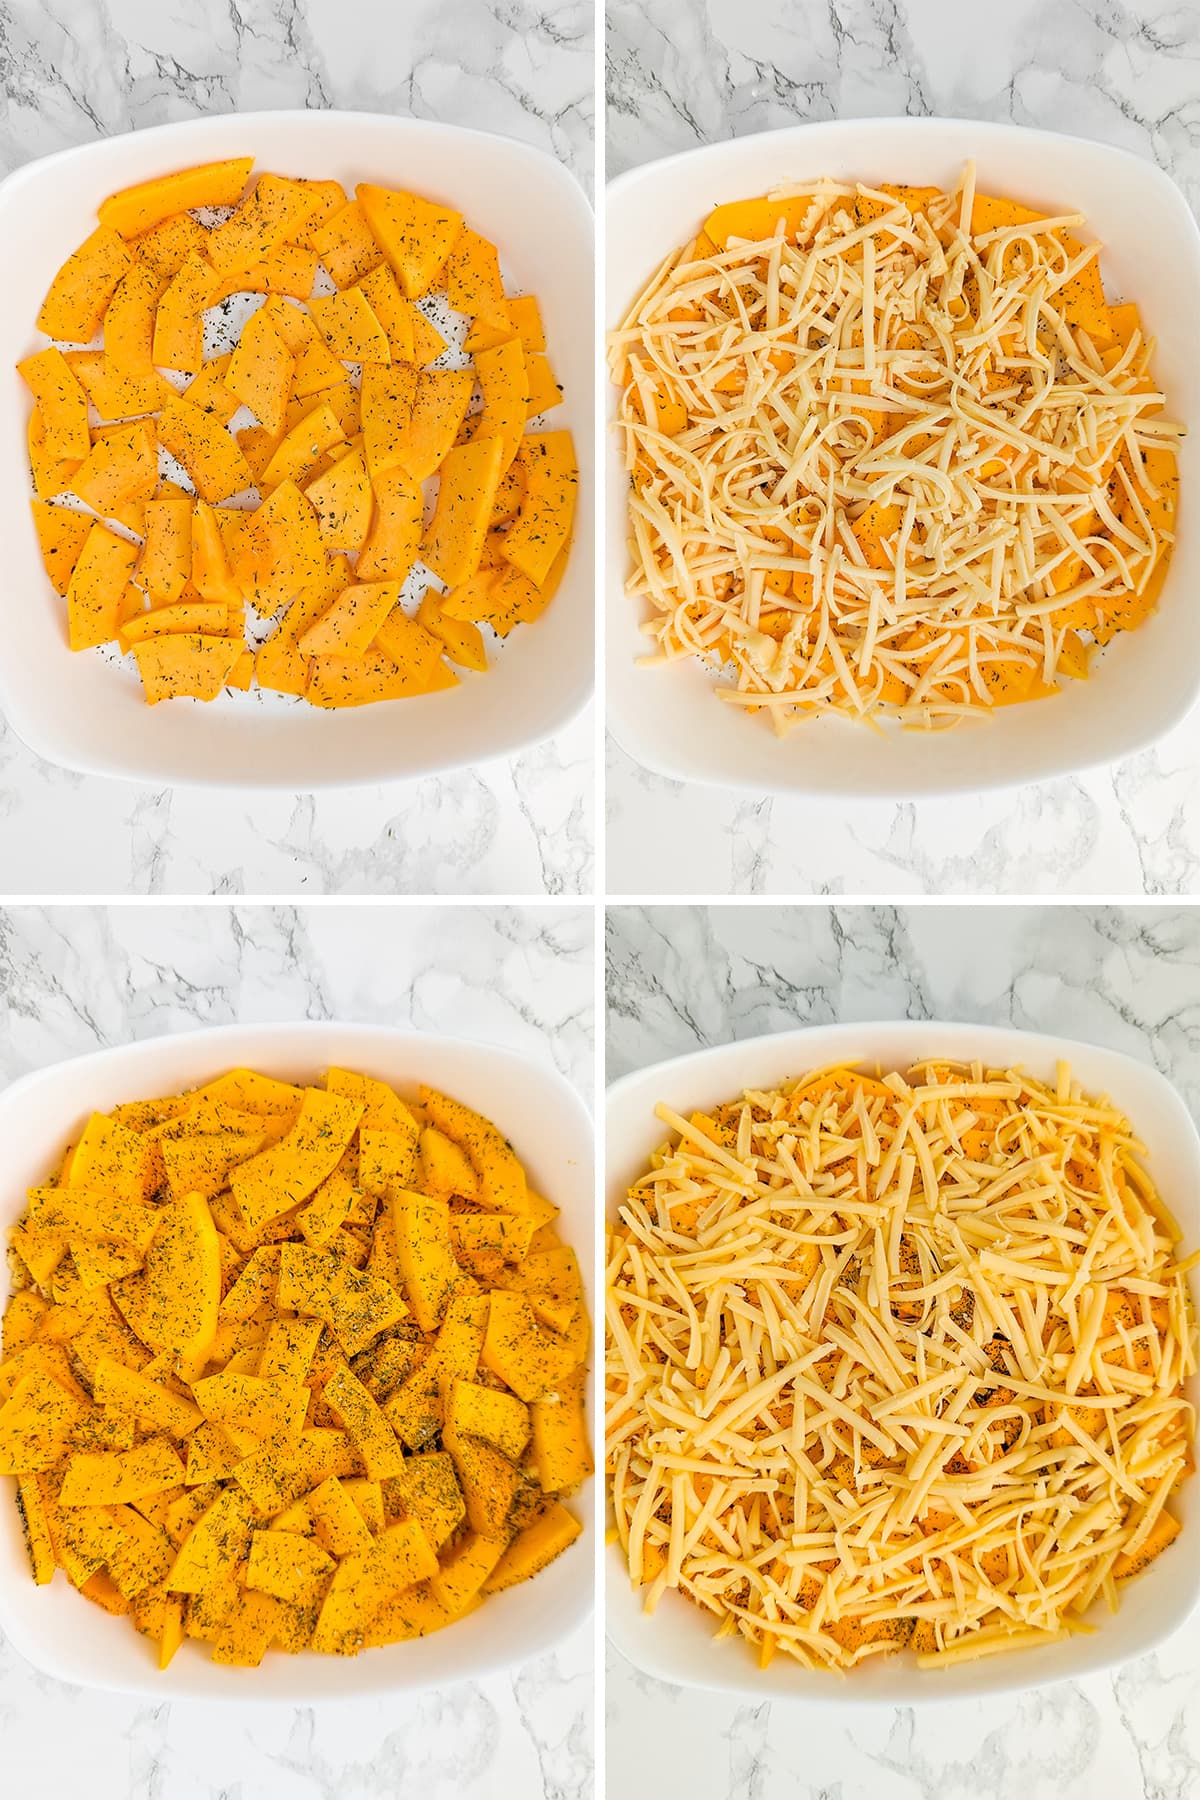 Collage of 4 images of seasoned pumpkin slices and covered with shredded cheese.